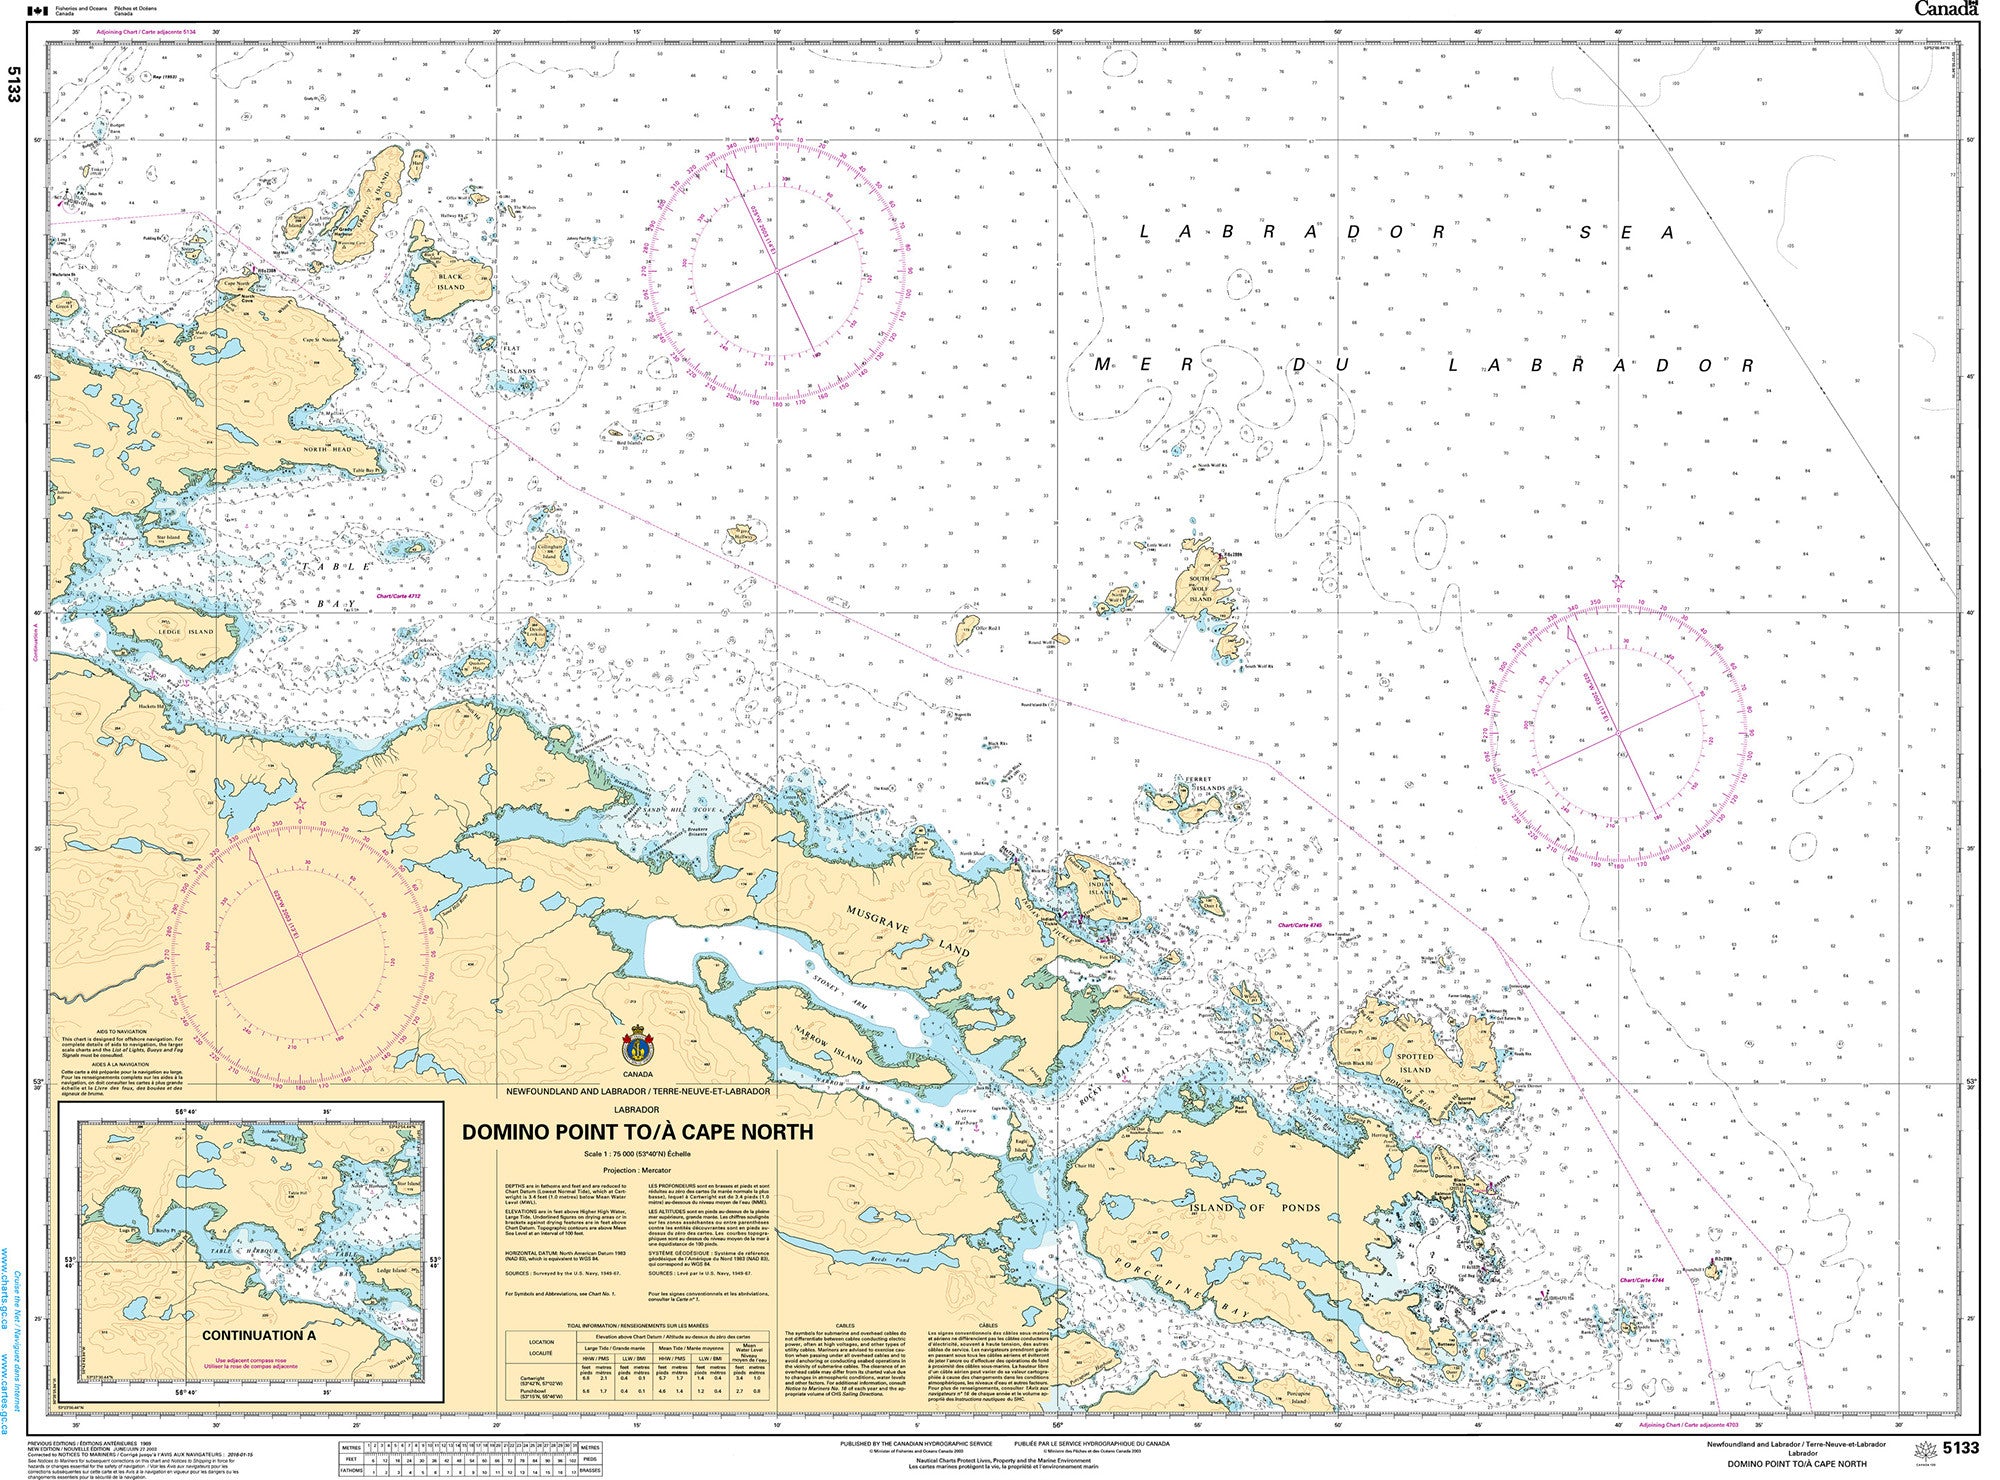 Canadian Hydrographic Service Nautical Chart CHS5133: Domino Point to/à Cape North